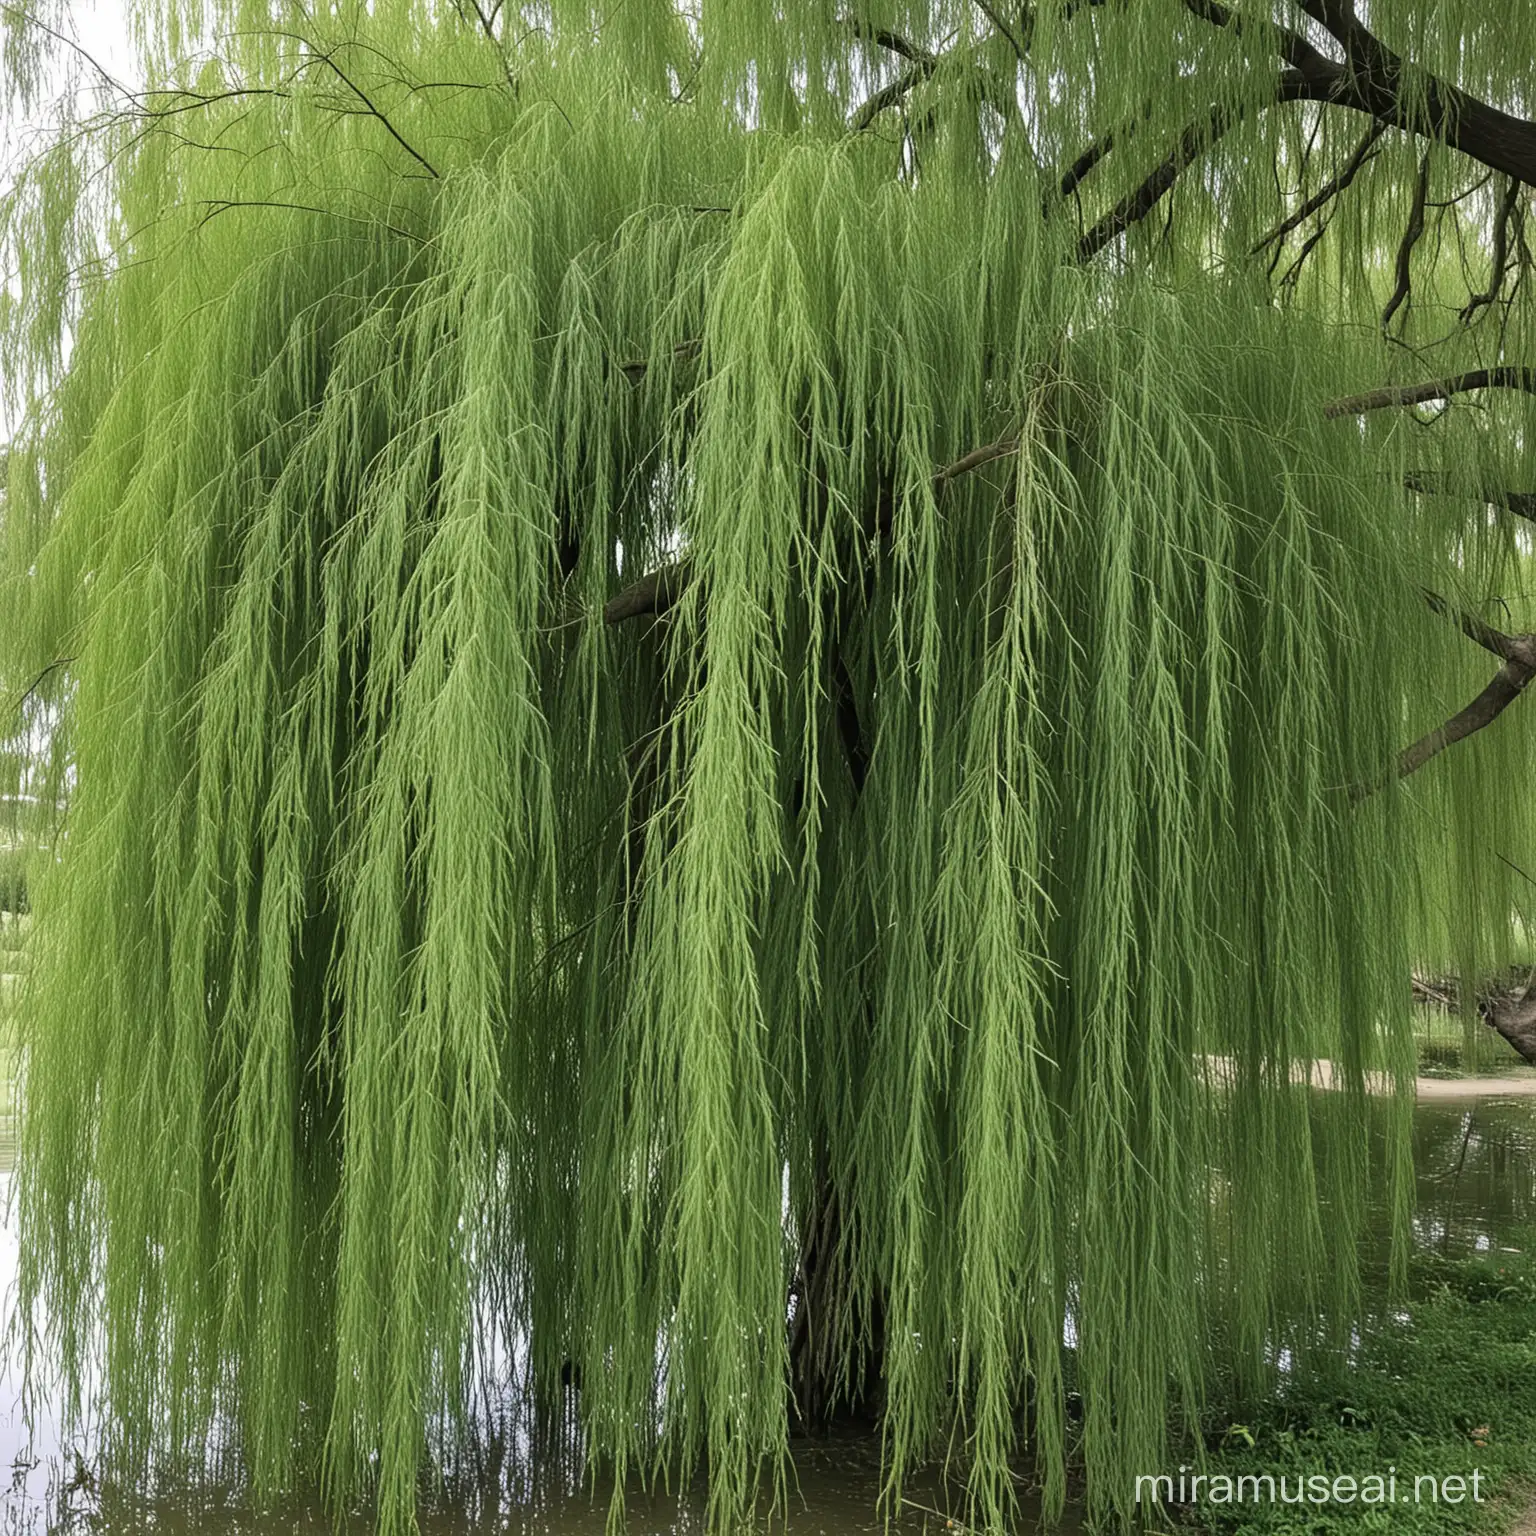 Serene Weeping Willow Tree by the Riverside